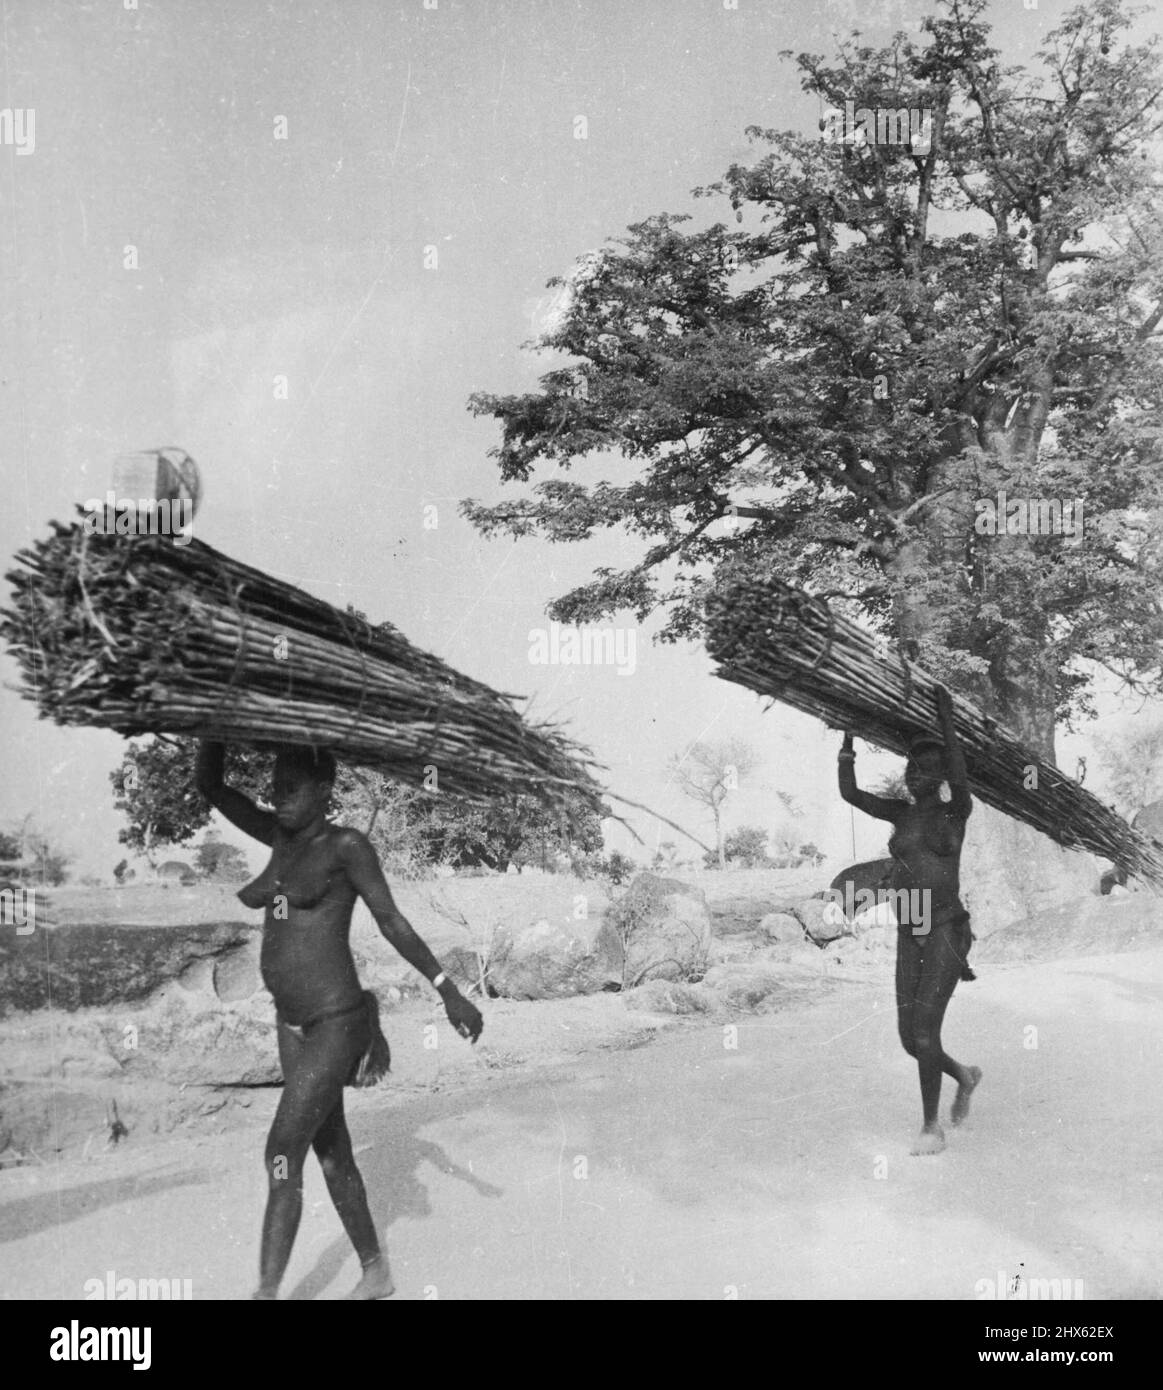 Pagans Of The Northern Territories, Gold Coast: The Furafuras At Work -- Furafura women carry firewood home from the market at Bolgatanga, It is a scarce commodity in this burnt-up plain, and comparatively expensive. Almost invariably it is the women who do the carrying of heavy loads. December 04, 1947. (Photo by Pictorial Press).;Pagans Of The Northern Territories, Gold Coast: The Furafuras At Work -- Furafura women carry firewood home from the market at Bolgatanga, It is a scarce commodity in Stock Photo